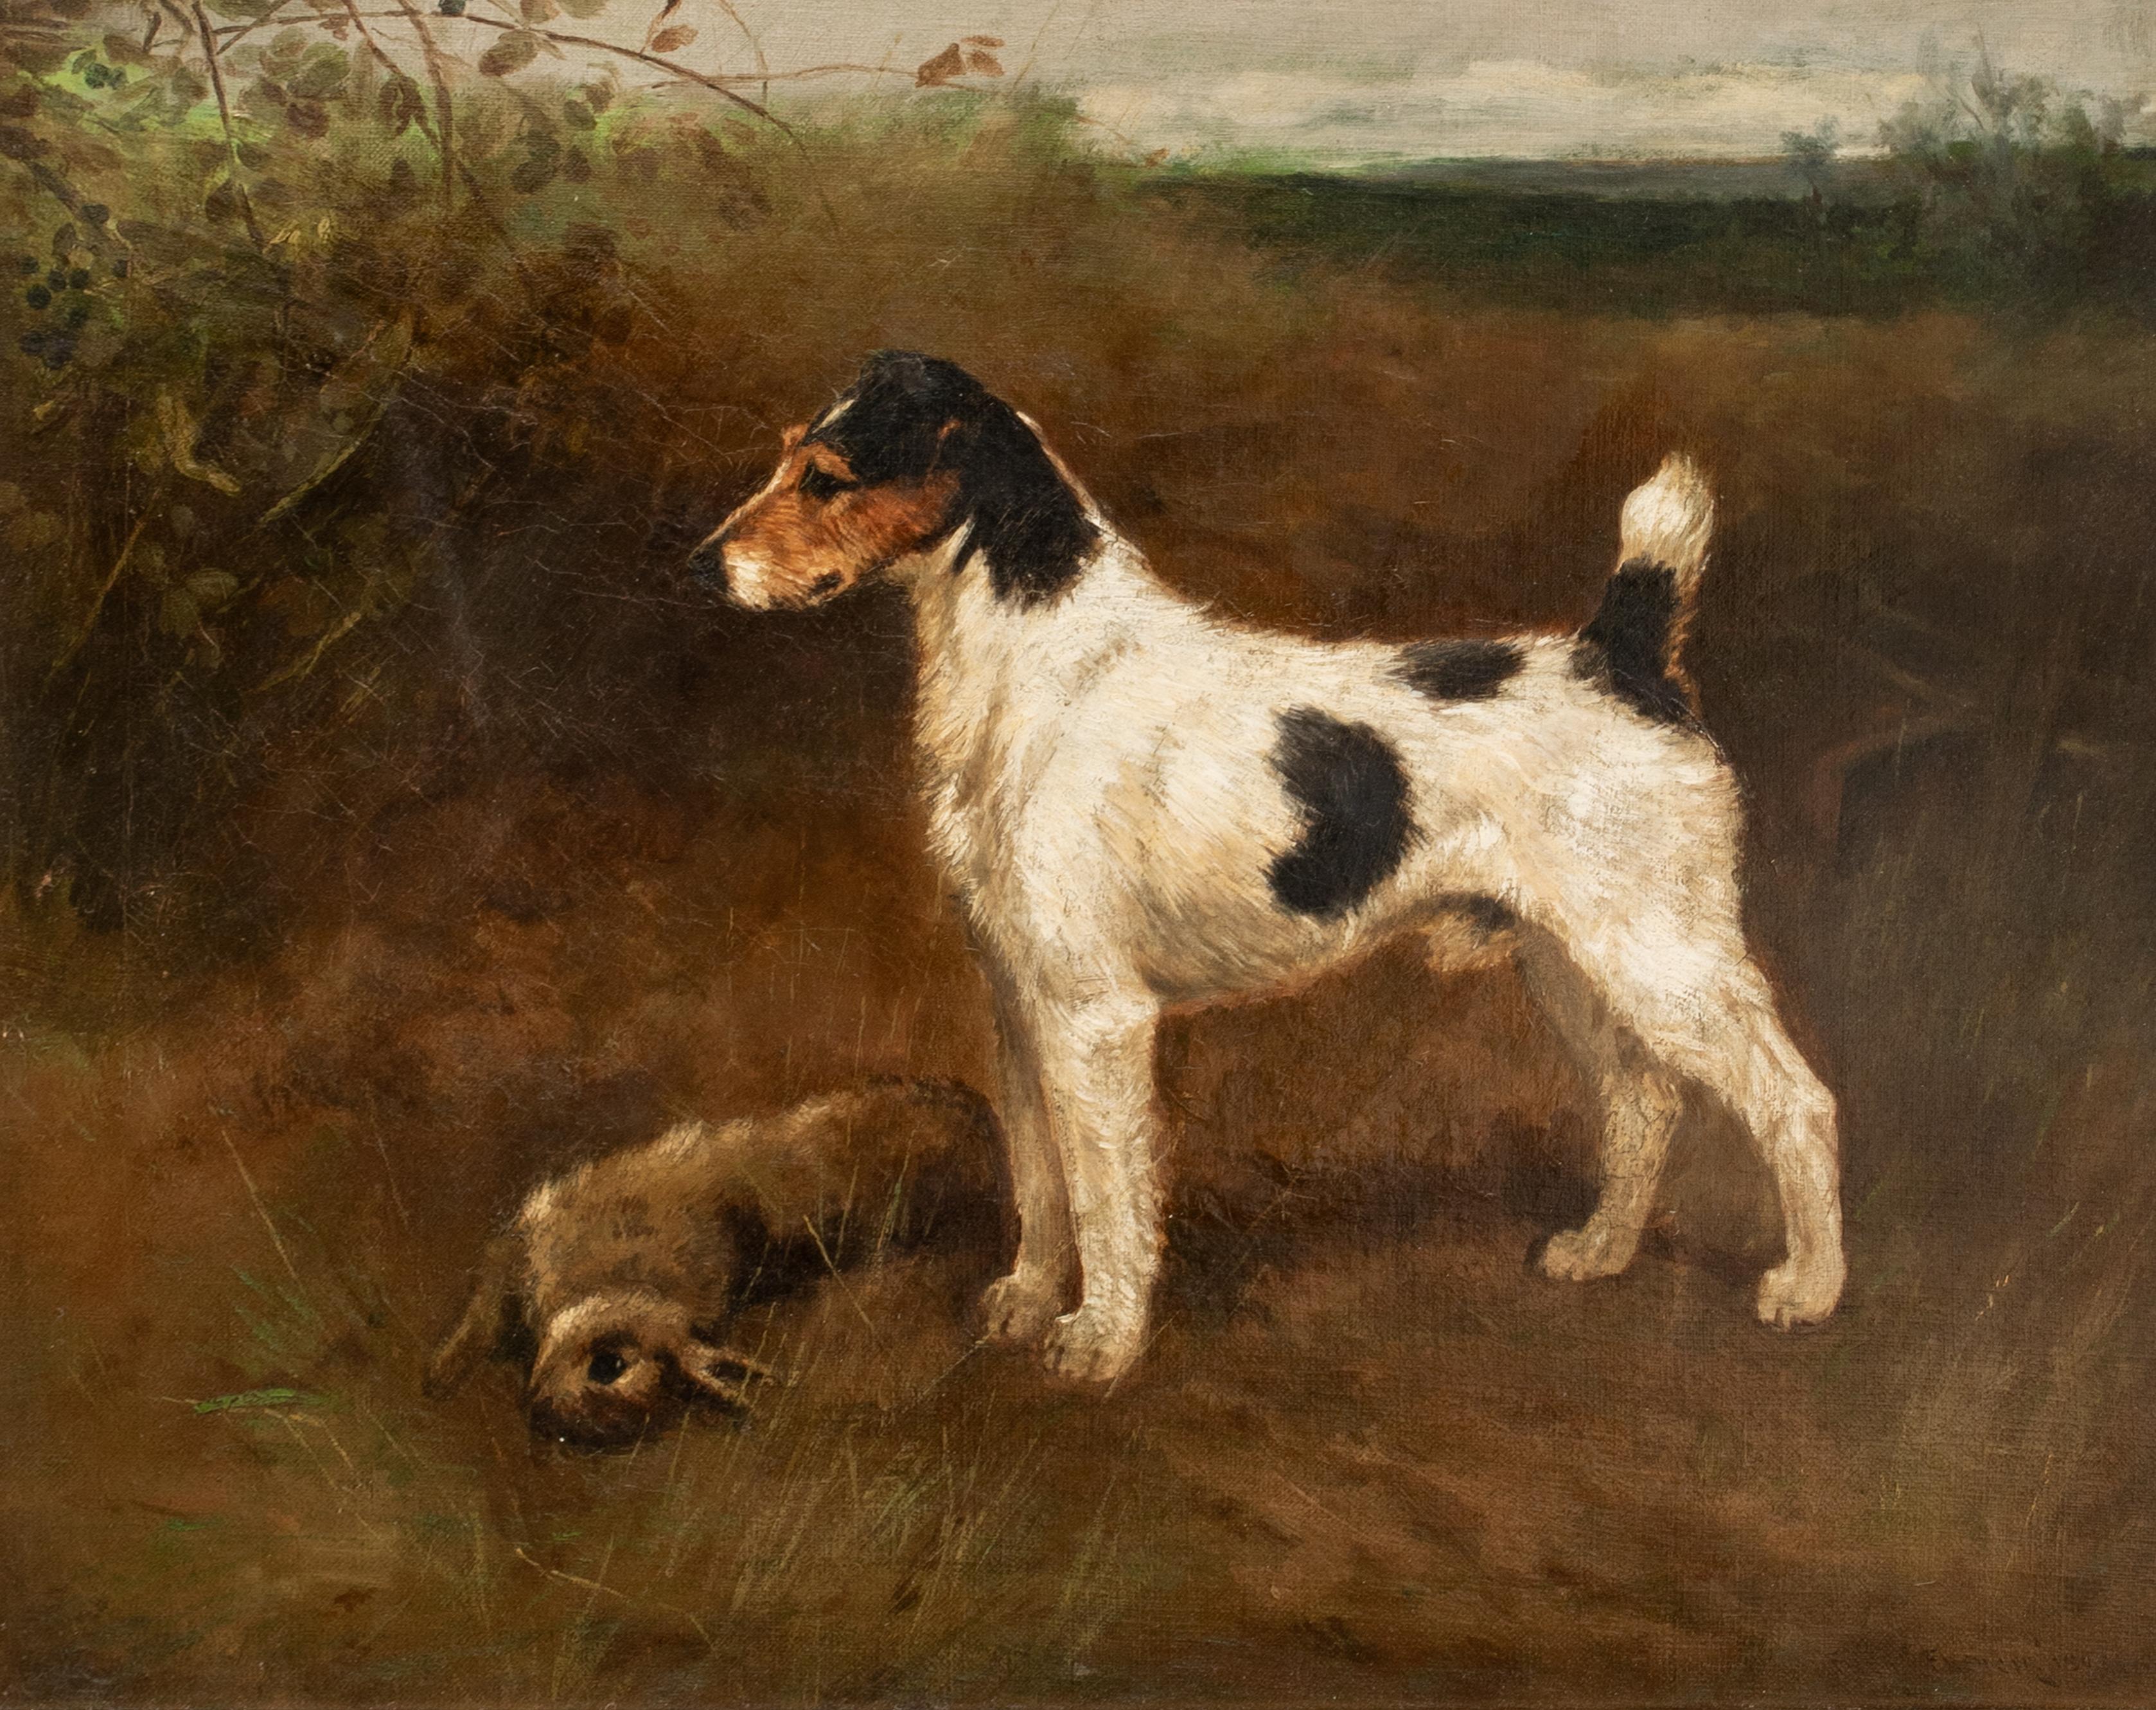 Wire Fox Terrier, 19th Century 

by FREDERICK FRENCH (1860-1916)

Large 19th Century portrait of a Wire Fox Terrier with a hair in a landscape, oil on canvas by Frederick French. Excellent quality and condition rare early example of the breed in